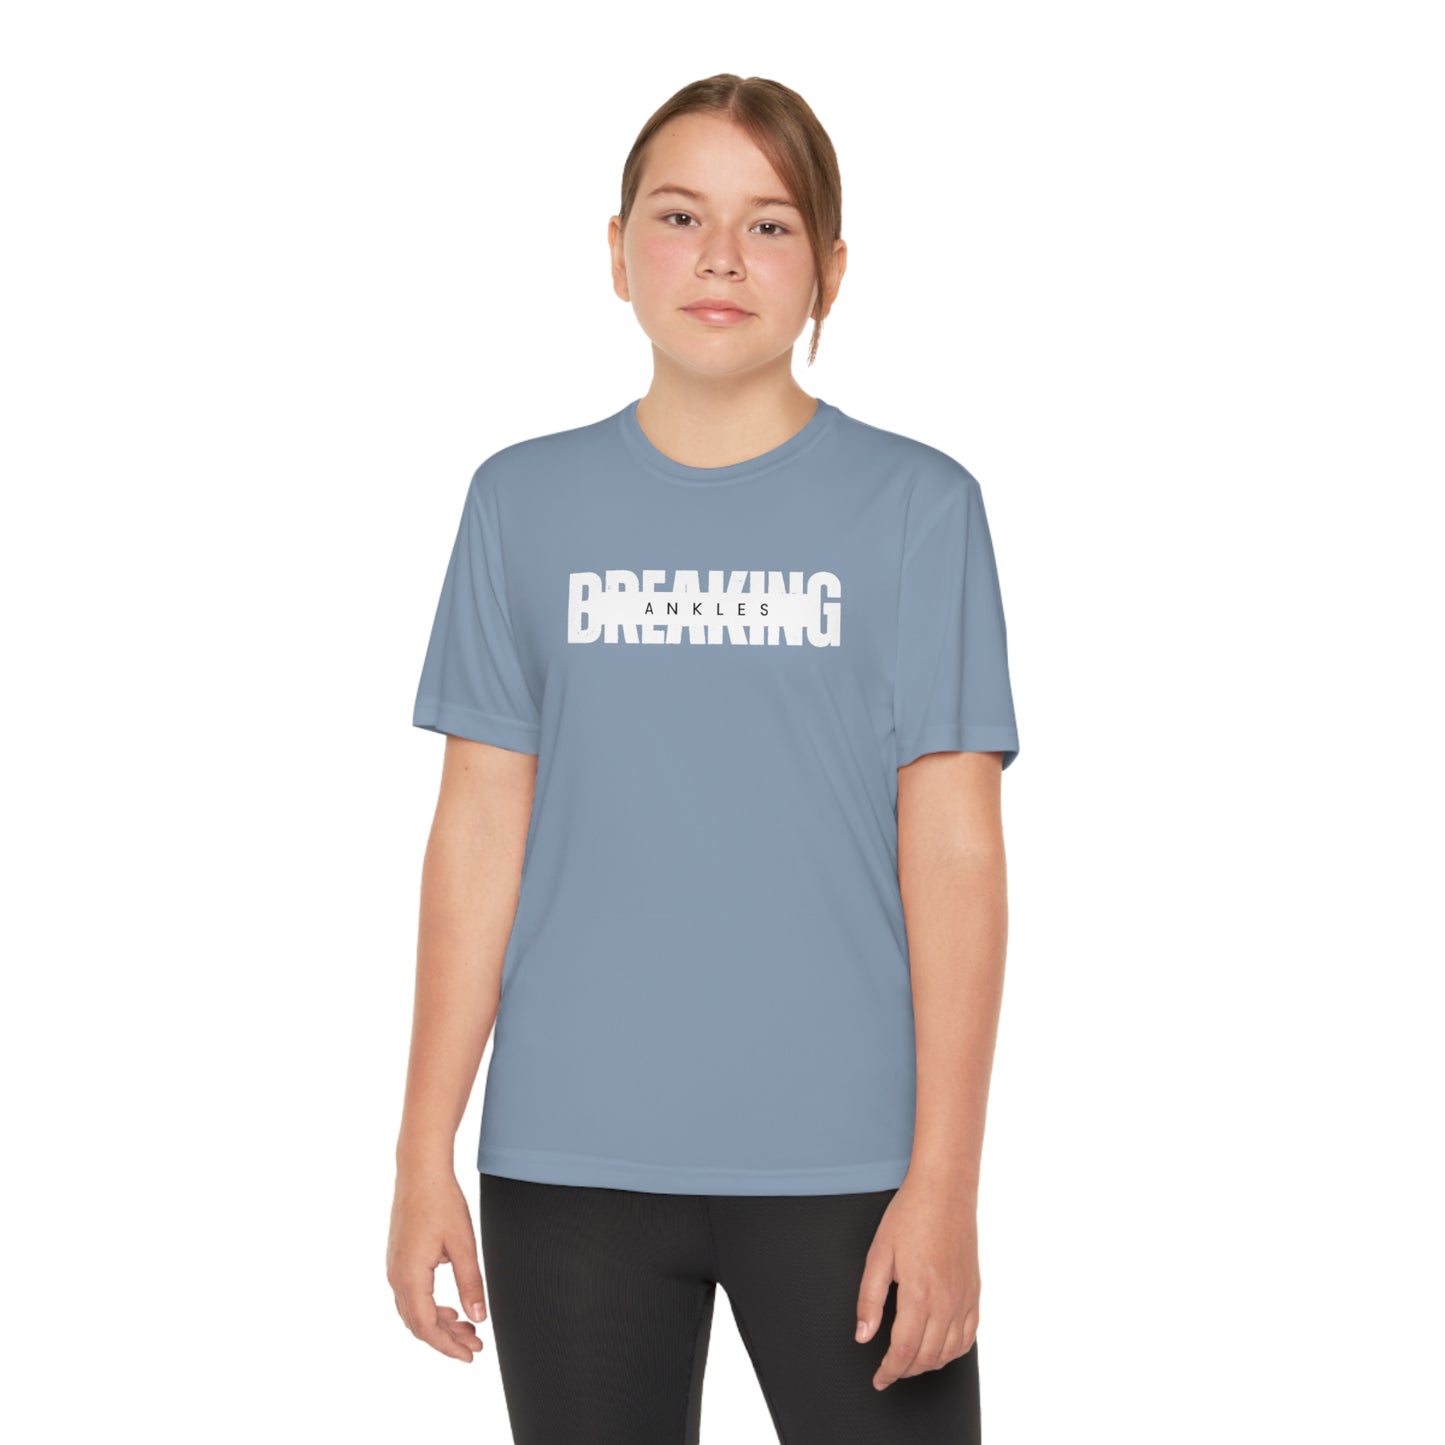 Breaking Ankles - Youth Competitor Tee